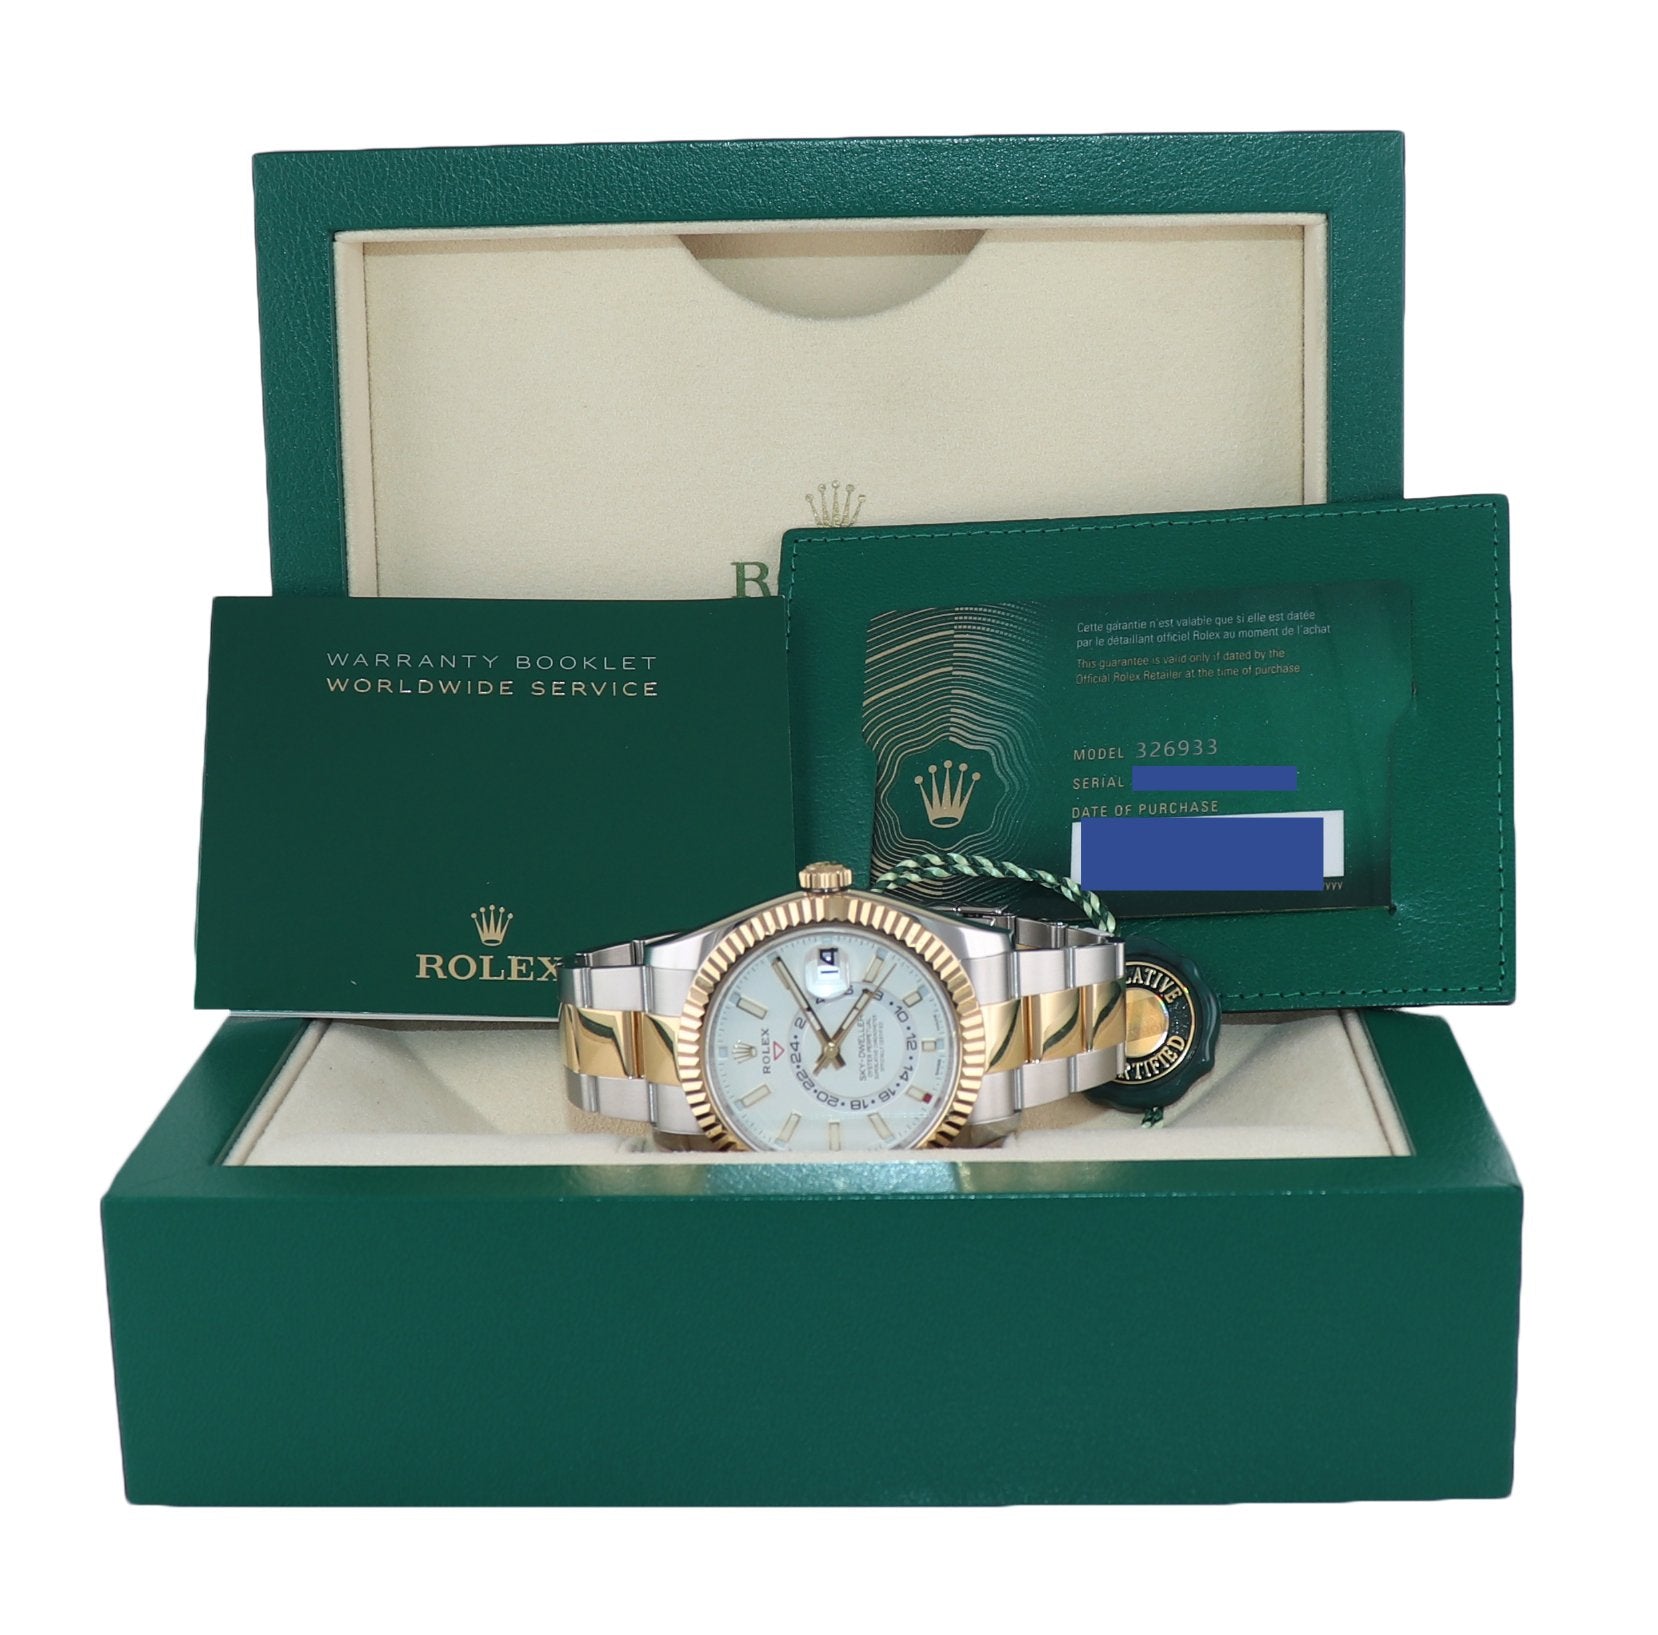 2020 NEW PAPERS Rolex Sky-Dweller 326933 White Two Tone Gold Steel 42mm Watch